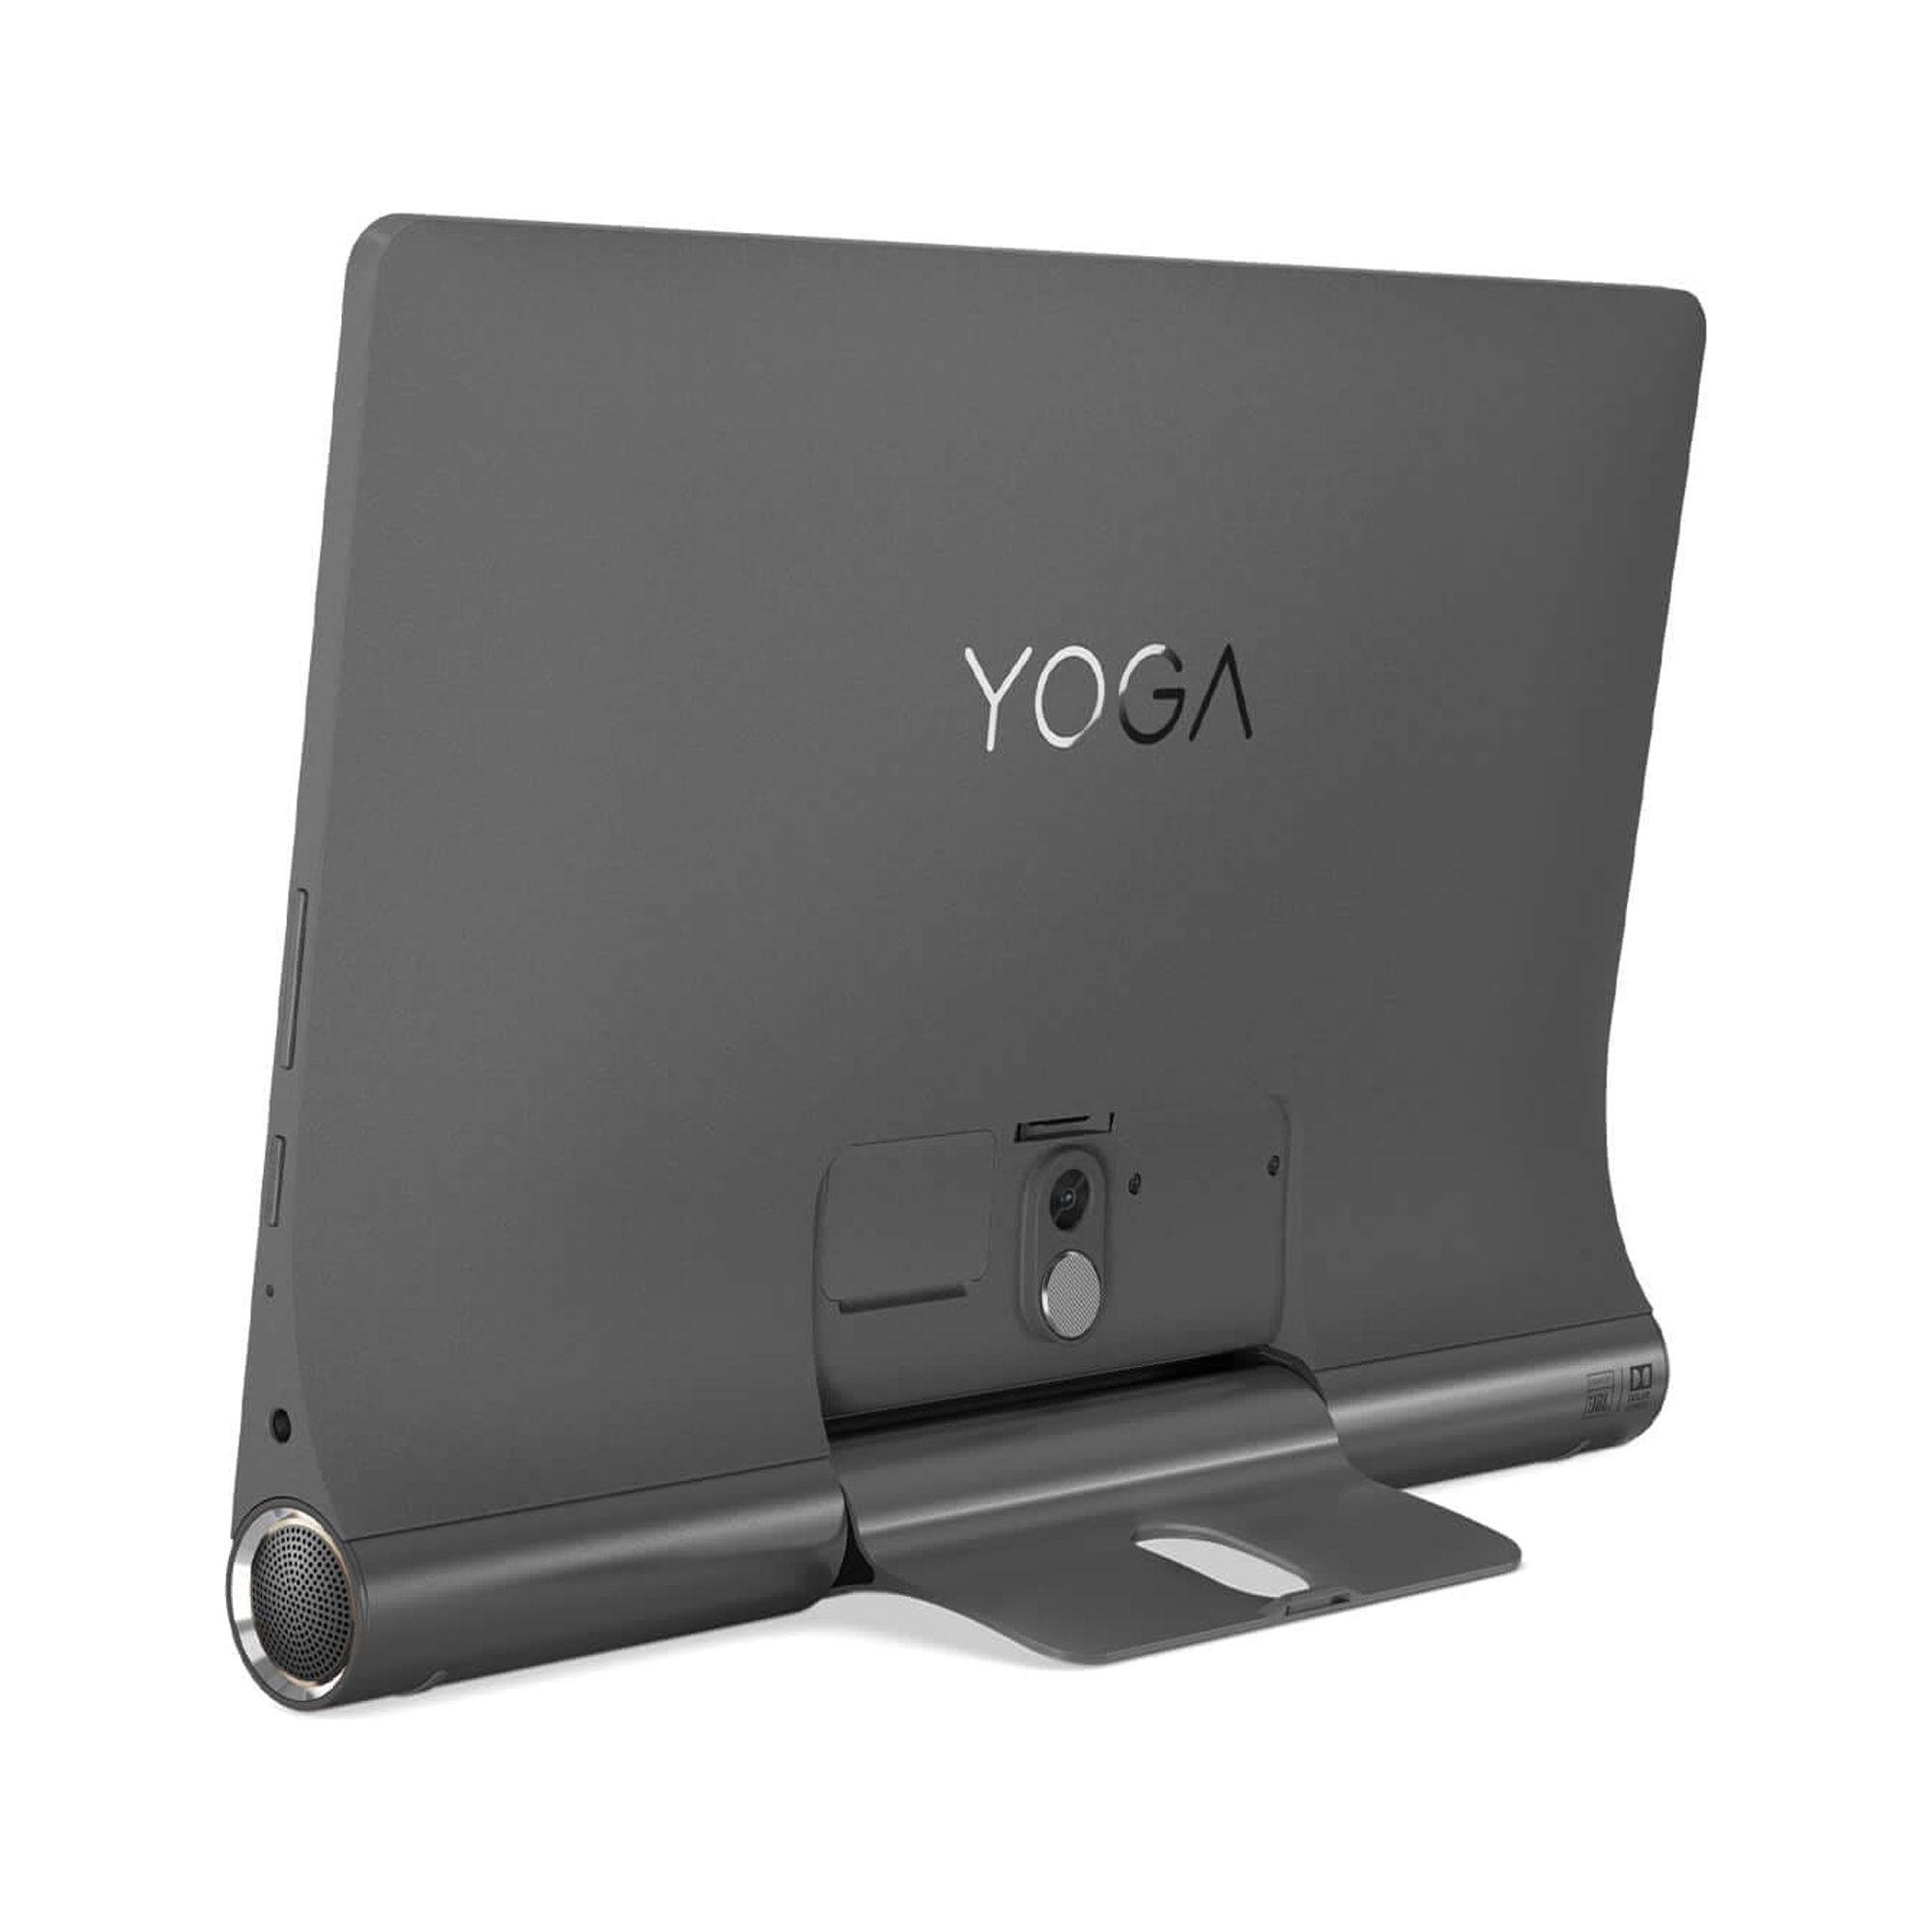 Lenovo Yoga Smart Tab in Gray, 10.1" FHD IPS Touch, 4GB, 64GB eMMC, Android Pie - image 5 of 5